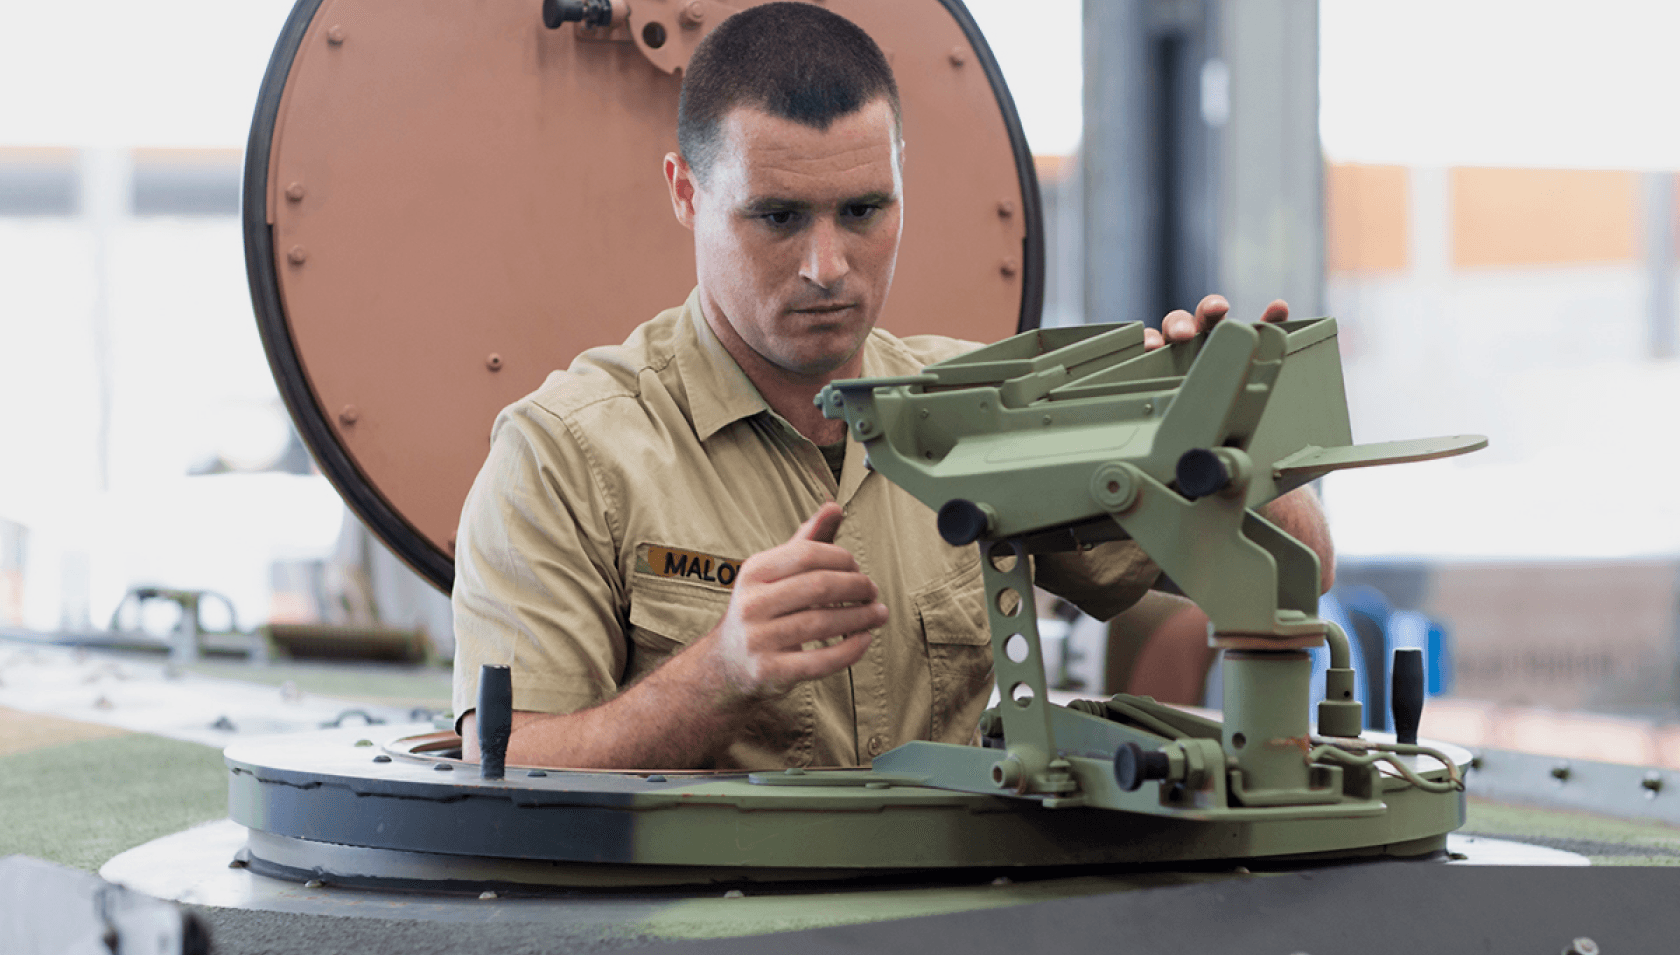 A member of the Army works on a tank.